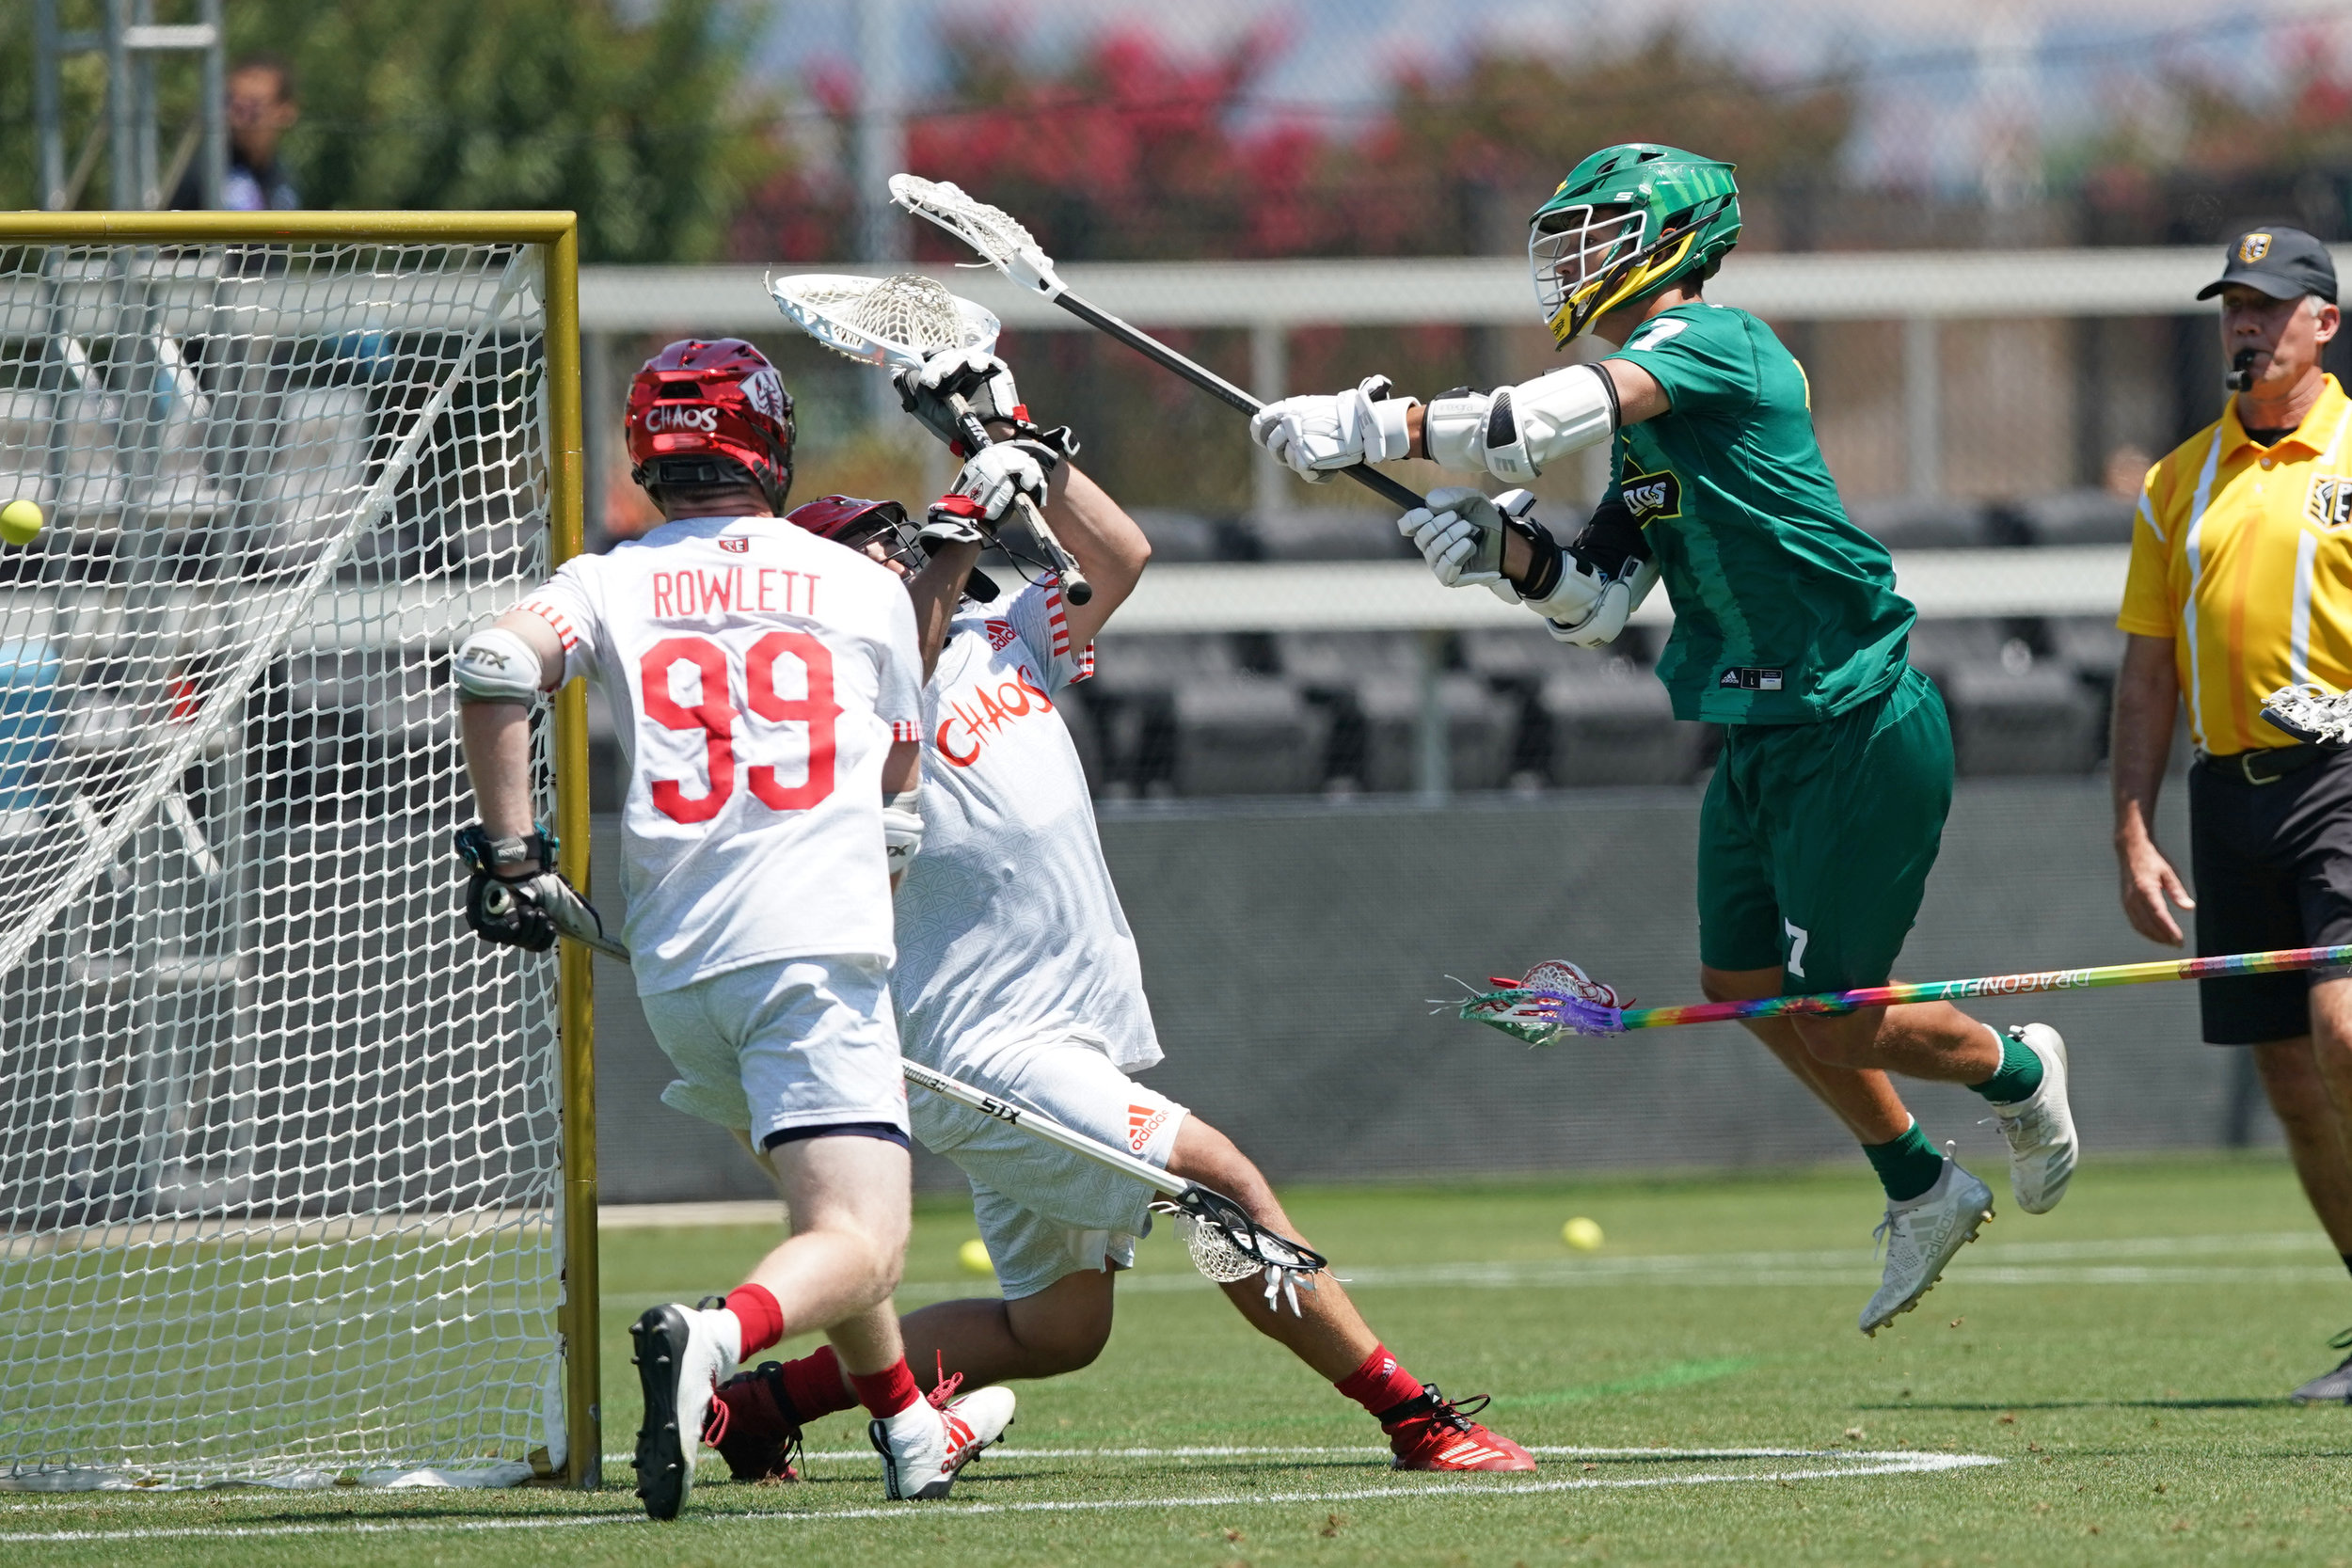 Copy of LAX – Chaos 13 vs. Redwoods 10, August 10